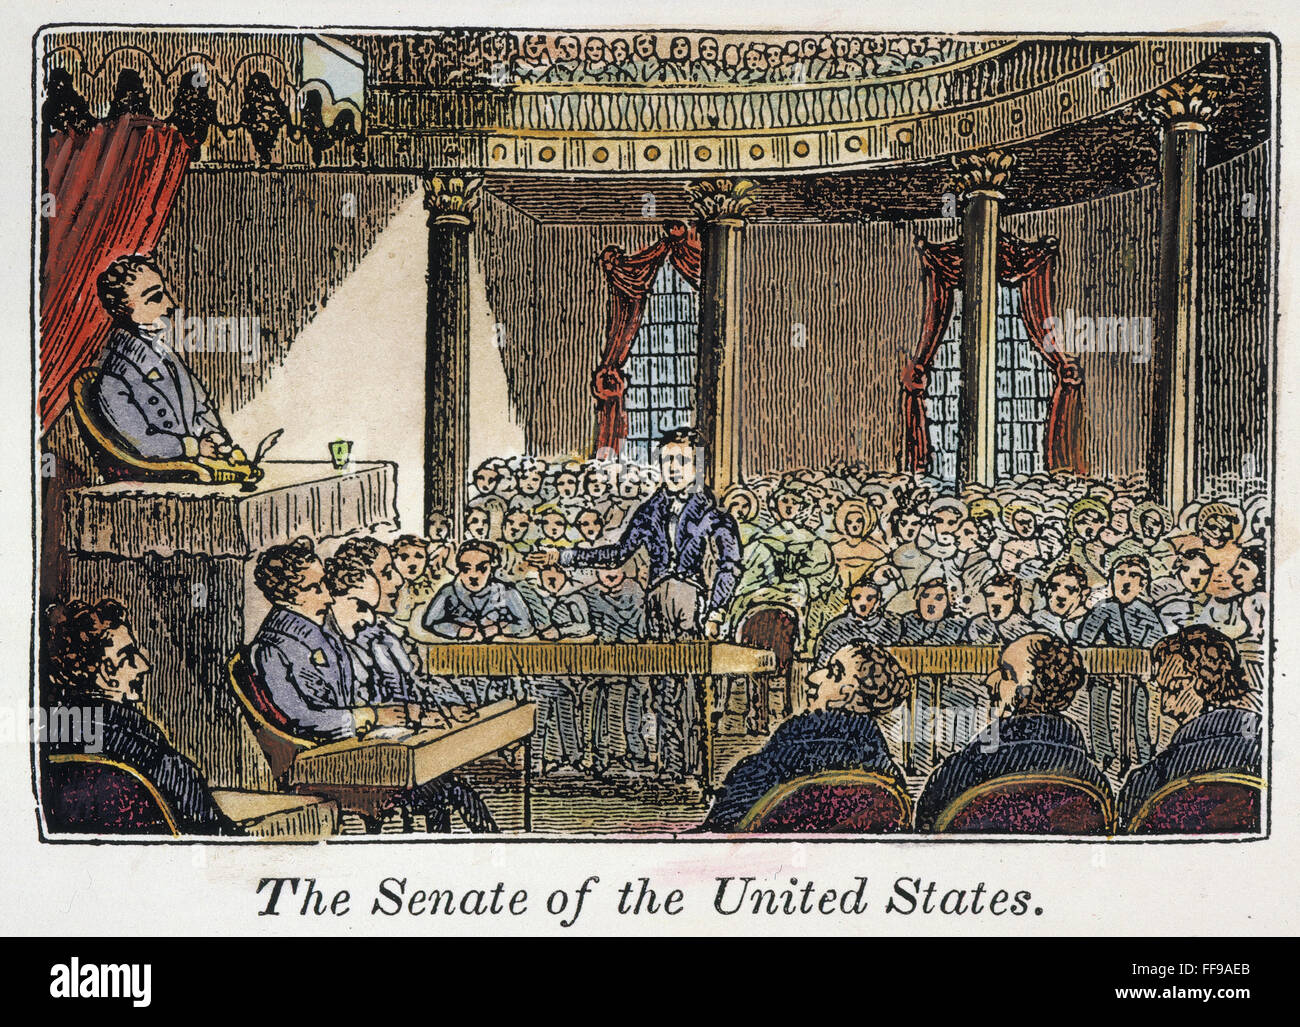 SENATE OF UNITED STATES. /nThe United States Senate in session at the Capitol in Washington, D.C. Wood engraving, American, 1836. Stock Photo